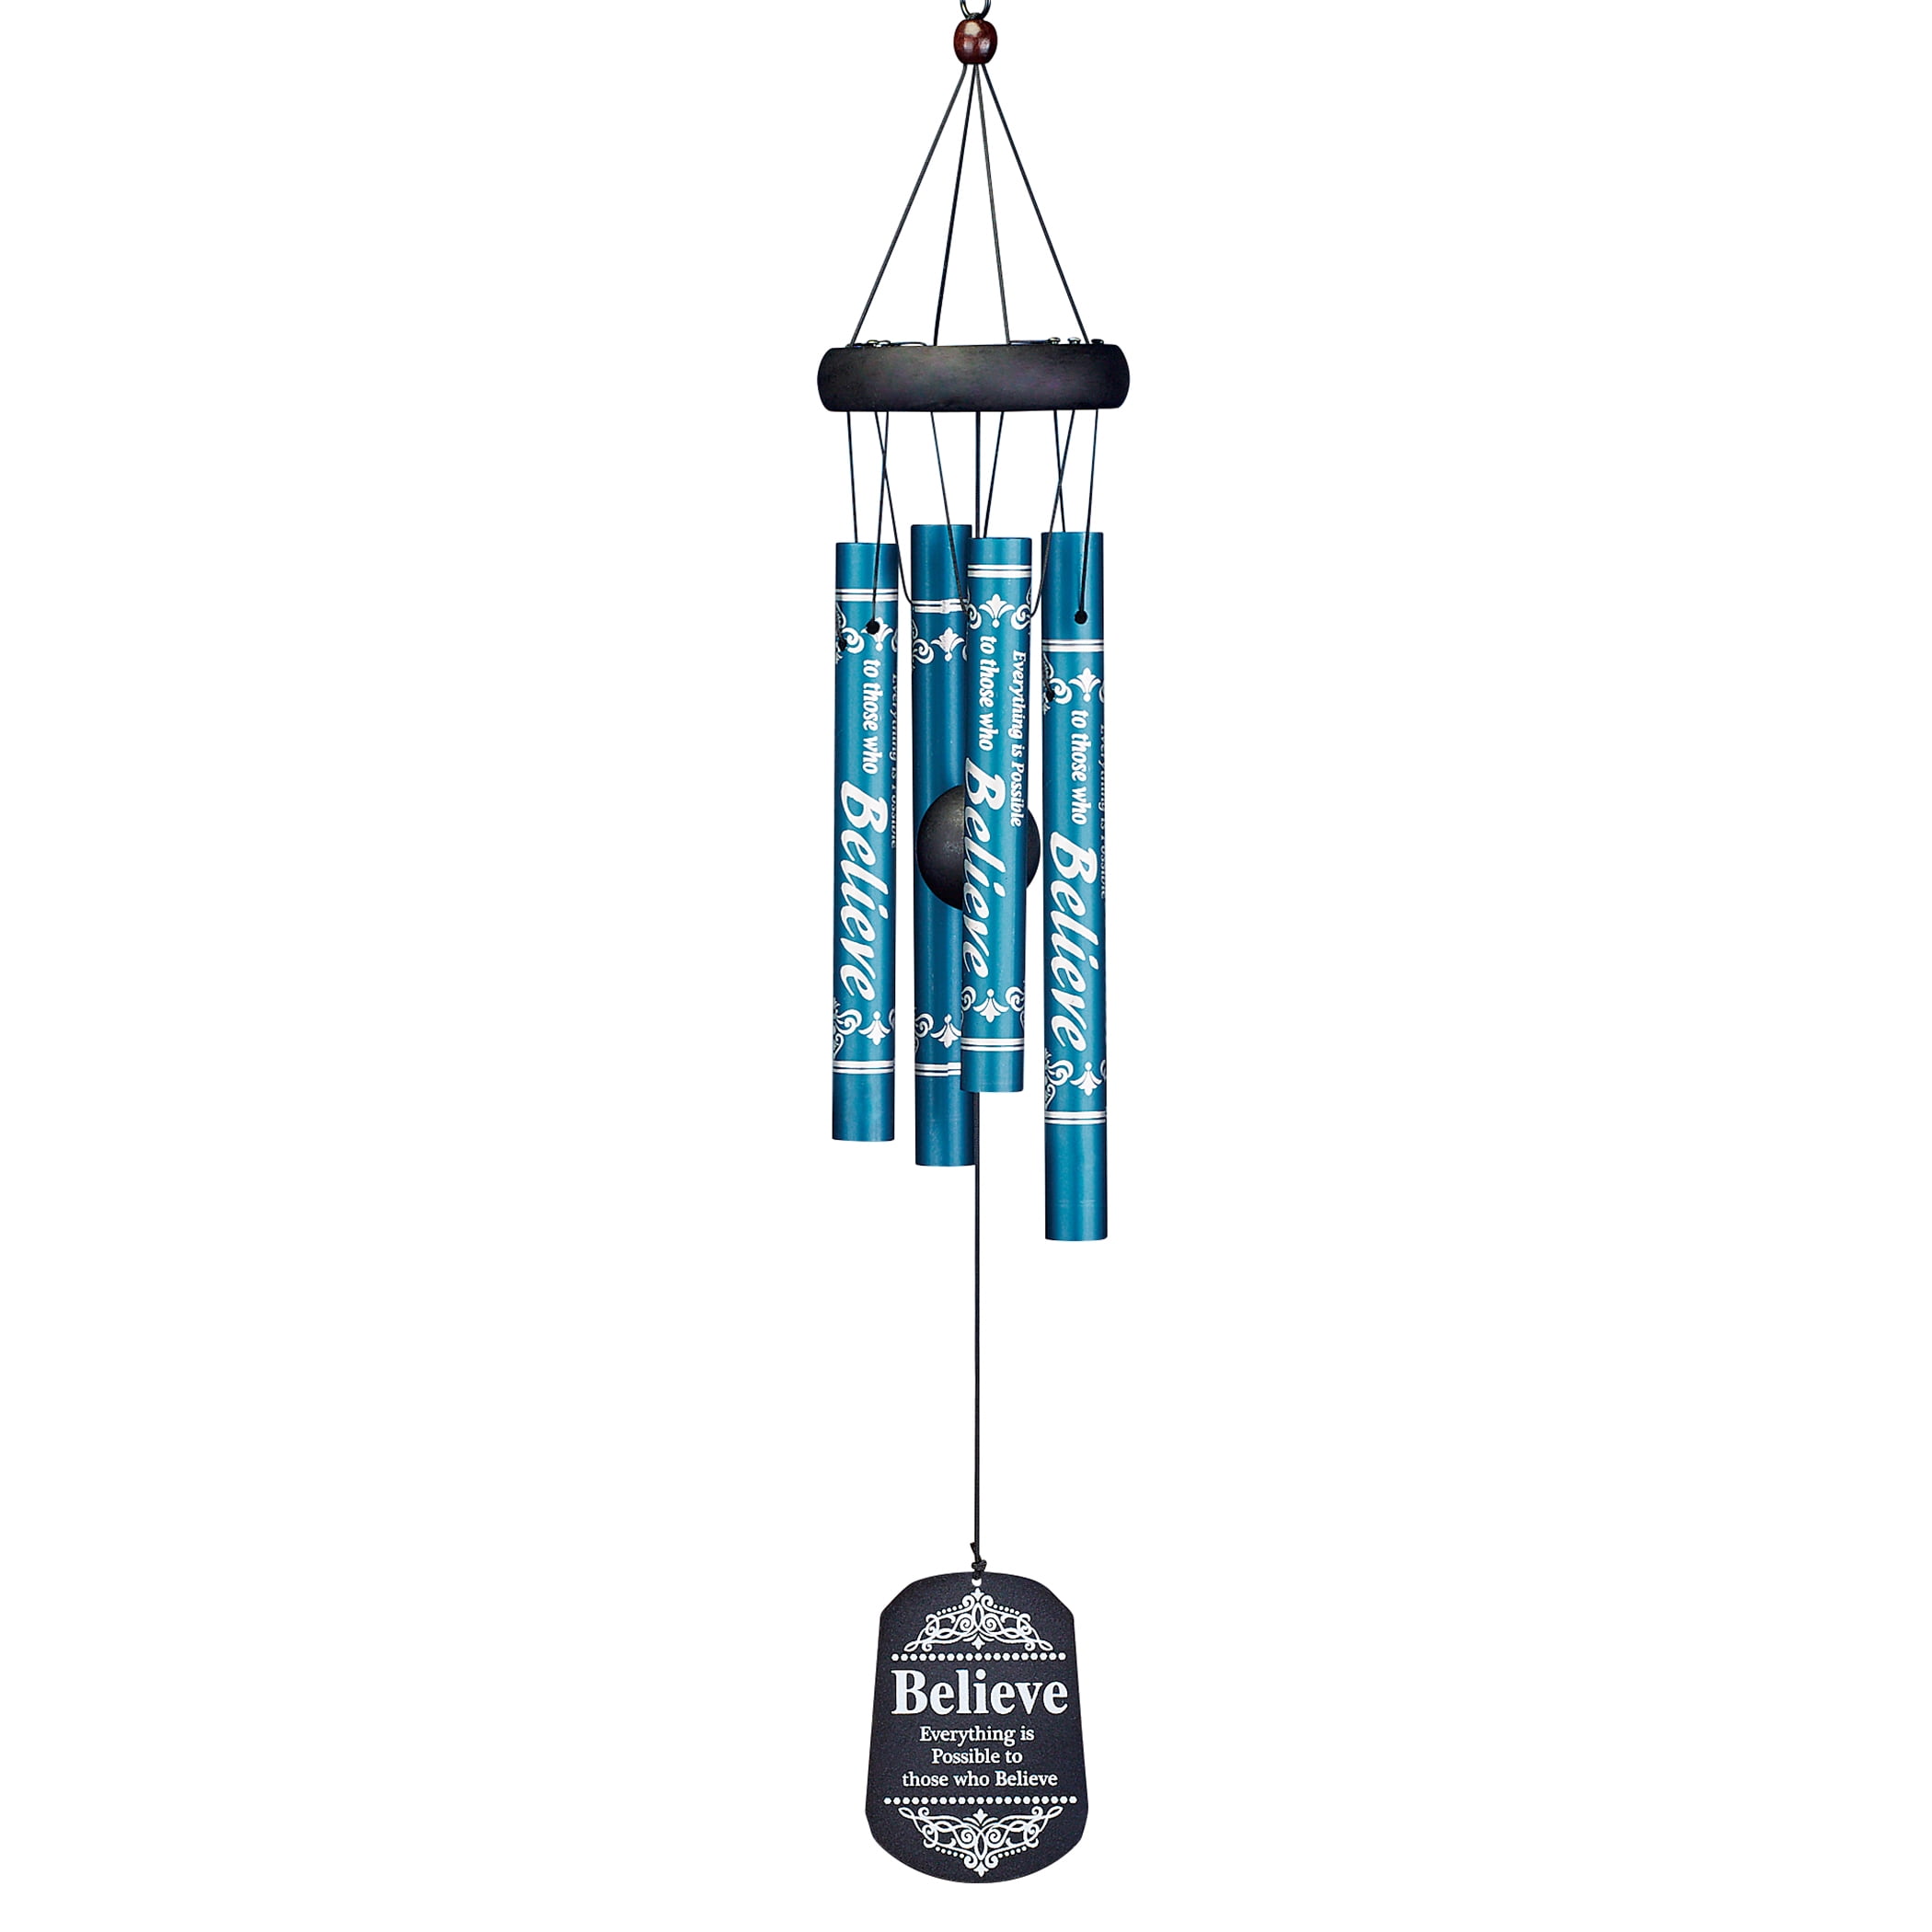 Where to hang wind chimes outside